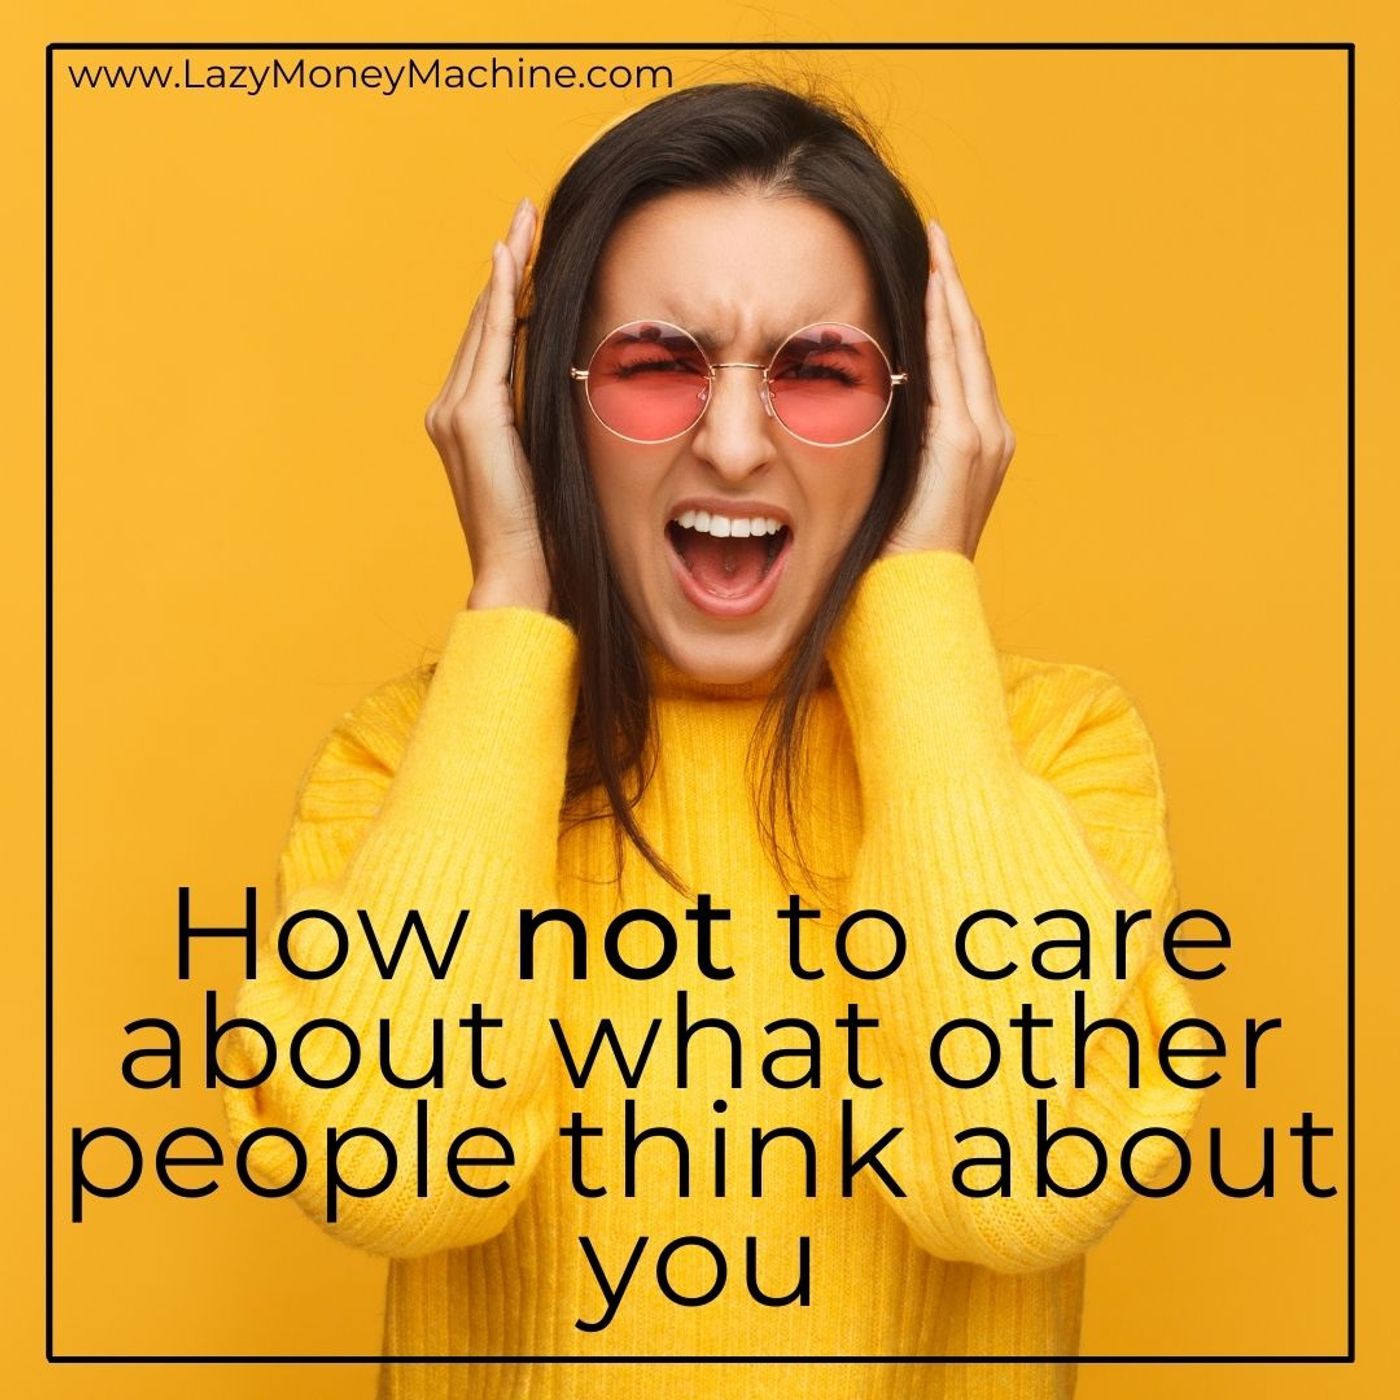 61: How not to care about what other people think about you